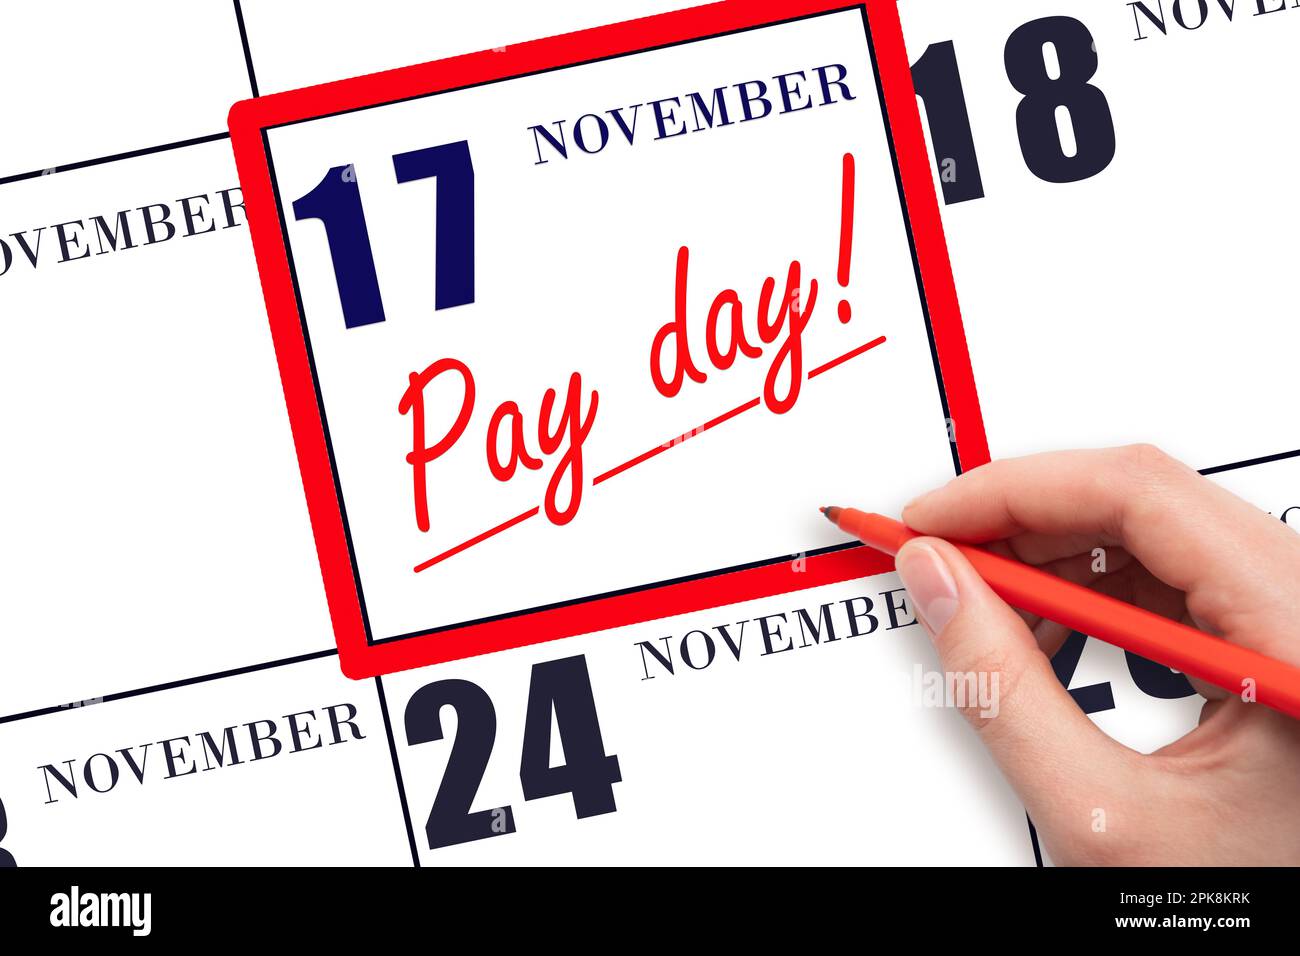 17th day of November. Hand writing text PAY DATE on calendar date November 17 and underline it. Payment due date. Reminder concept of payment. Autumn Stock Photo